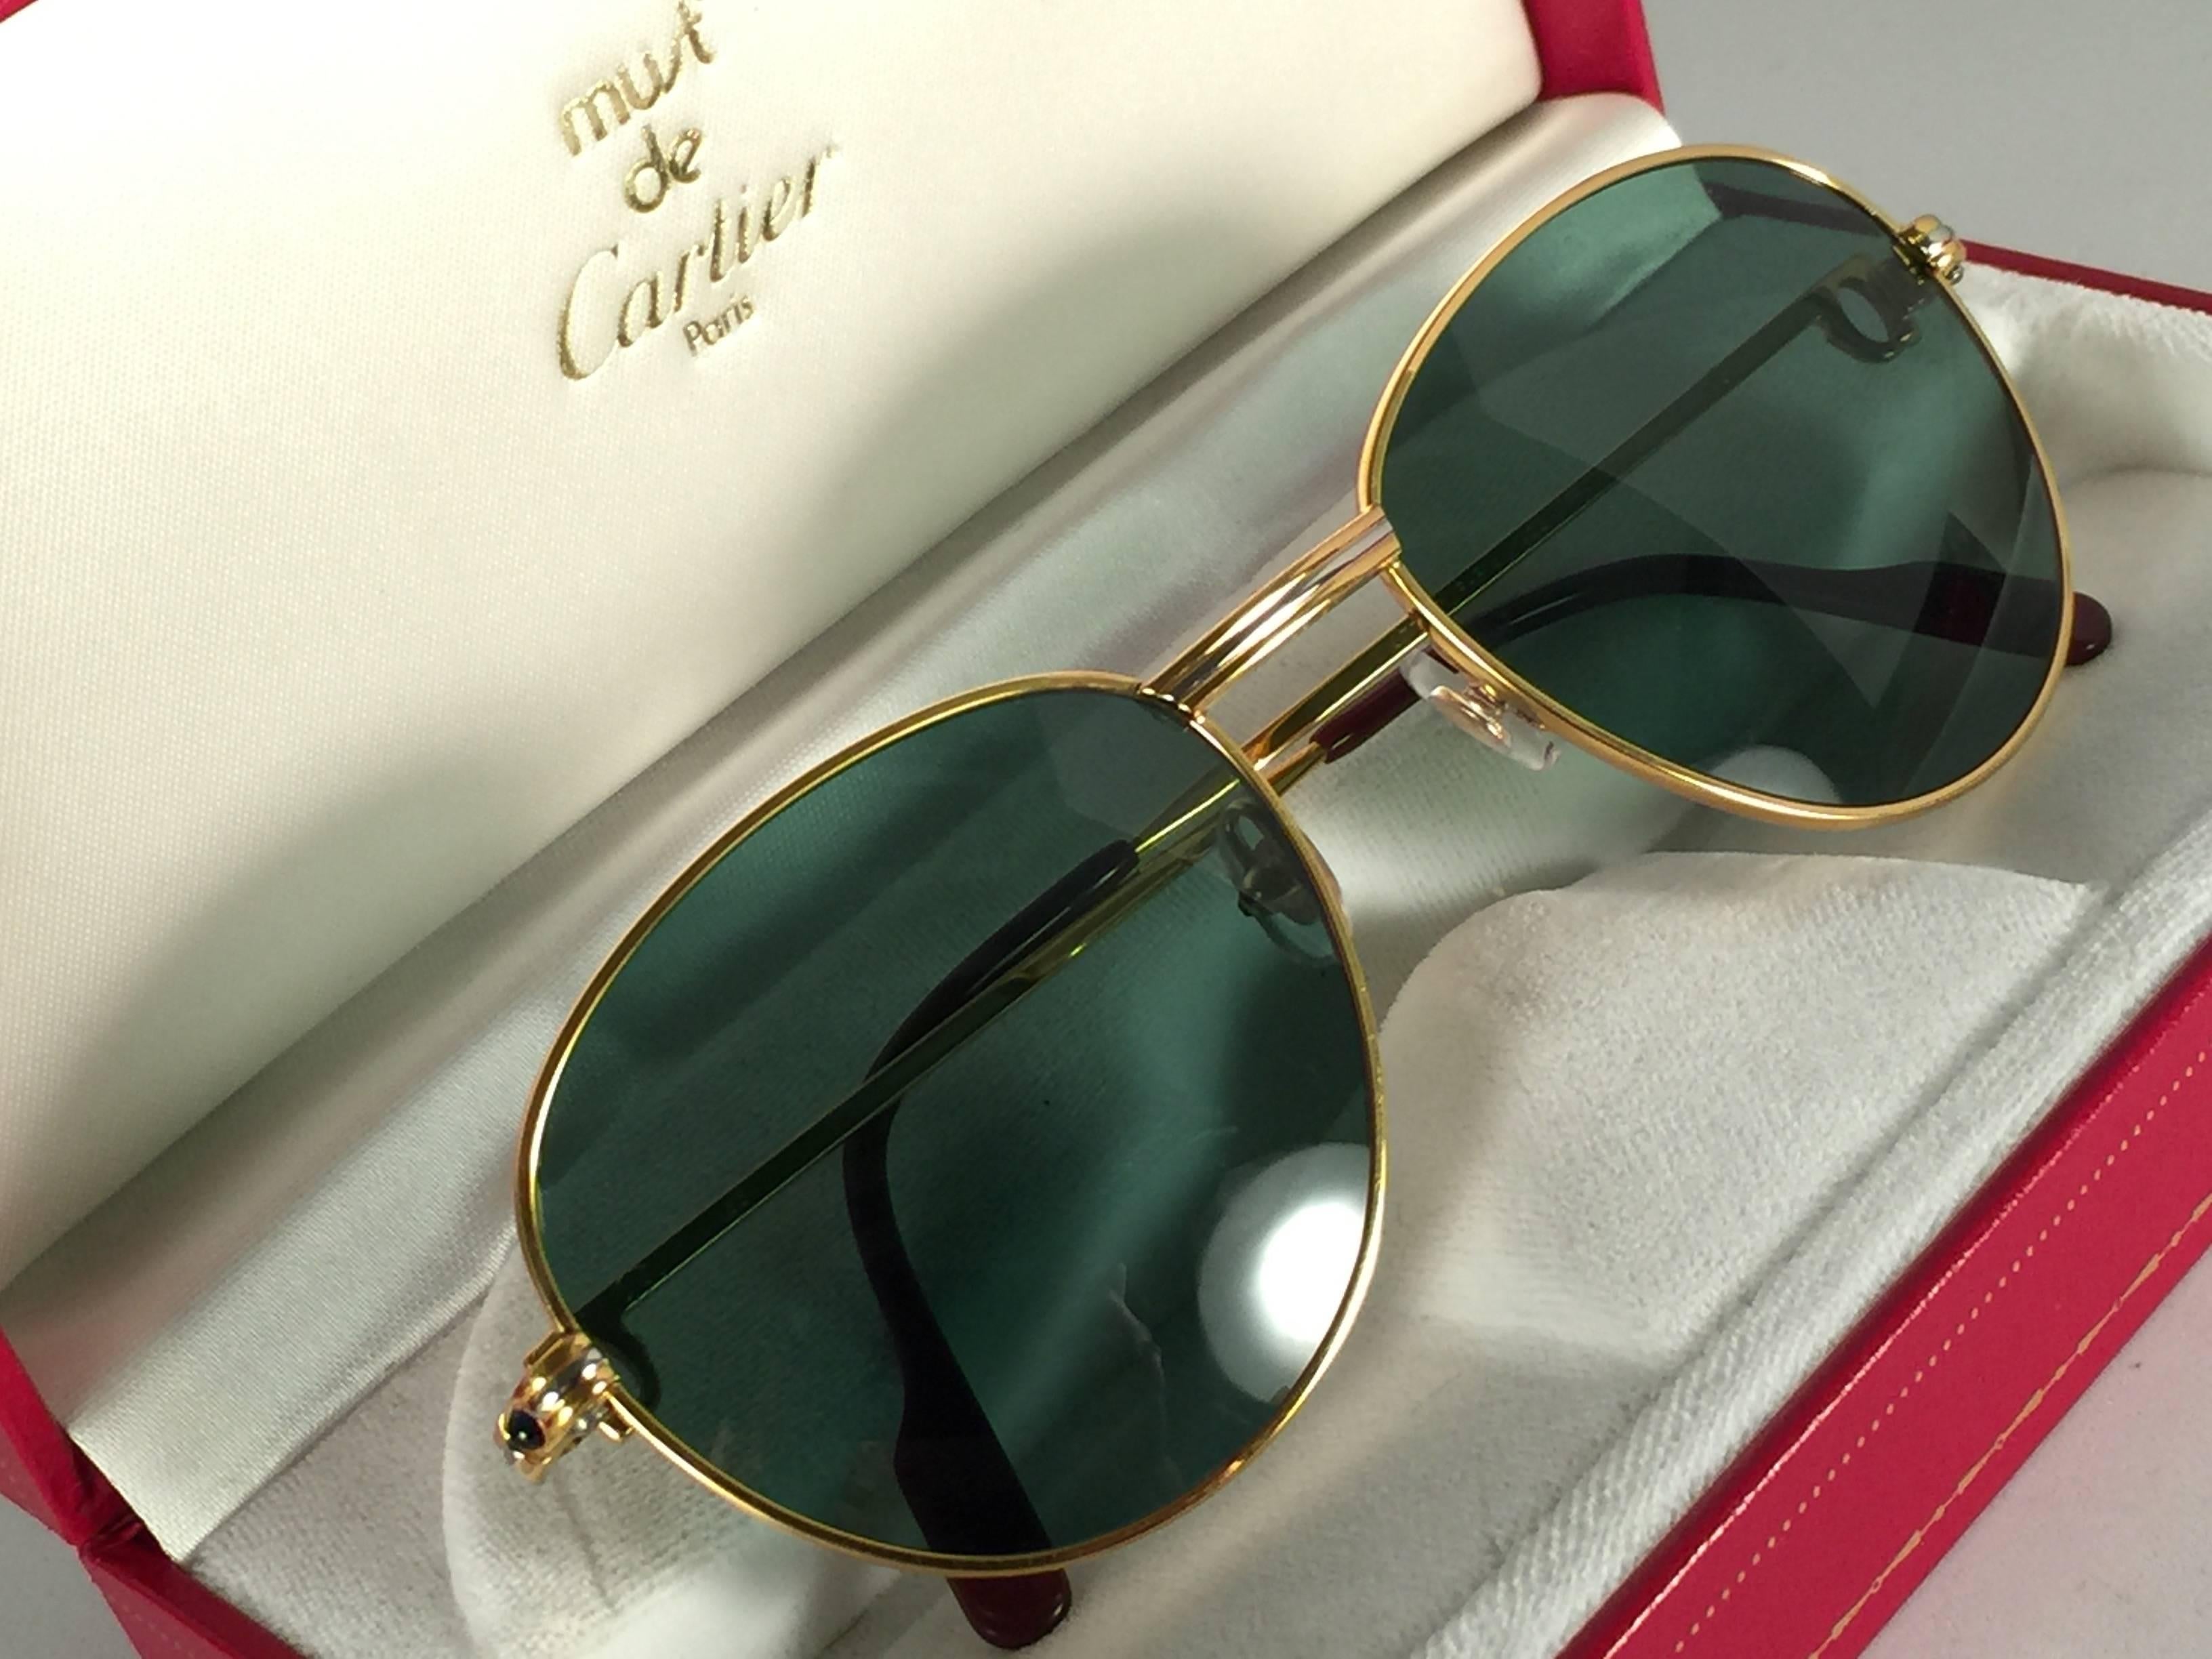 New Cartier Sapphire rounded sunglasses. green (uv protection) lenses. Frame is with the famous yellow and white gold accents on the front and on both sides. All hallmarks, from 1989. Red enamel with Cartier gold signs on the earpaddles. Both arms